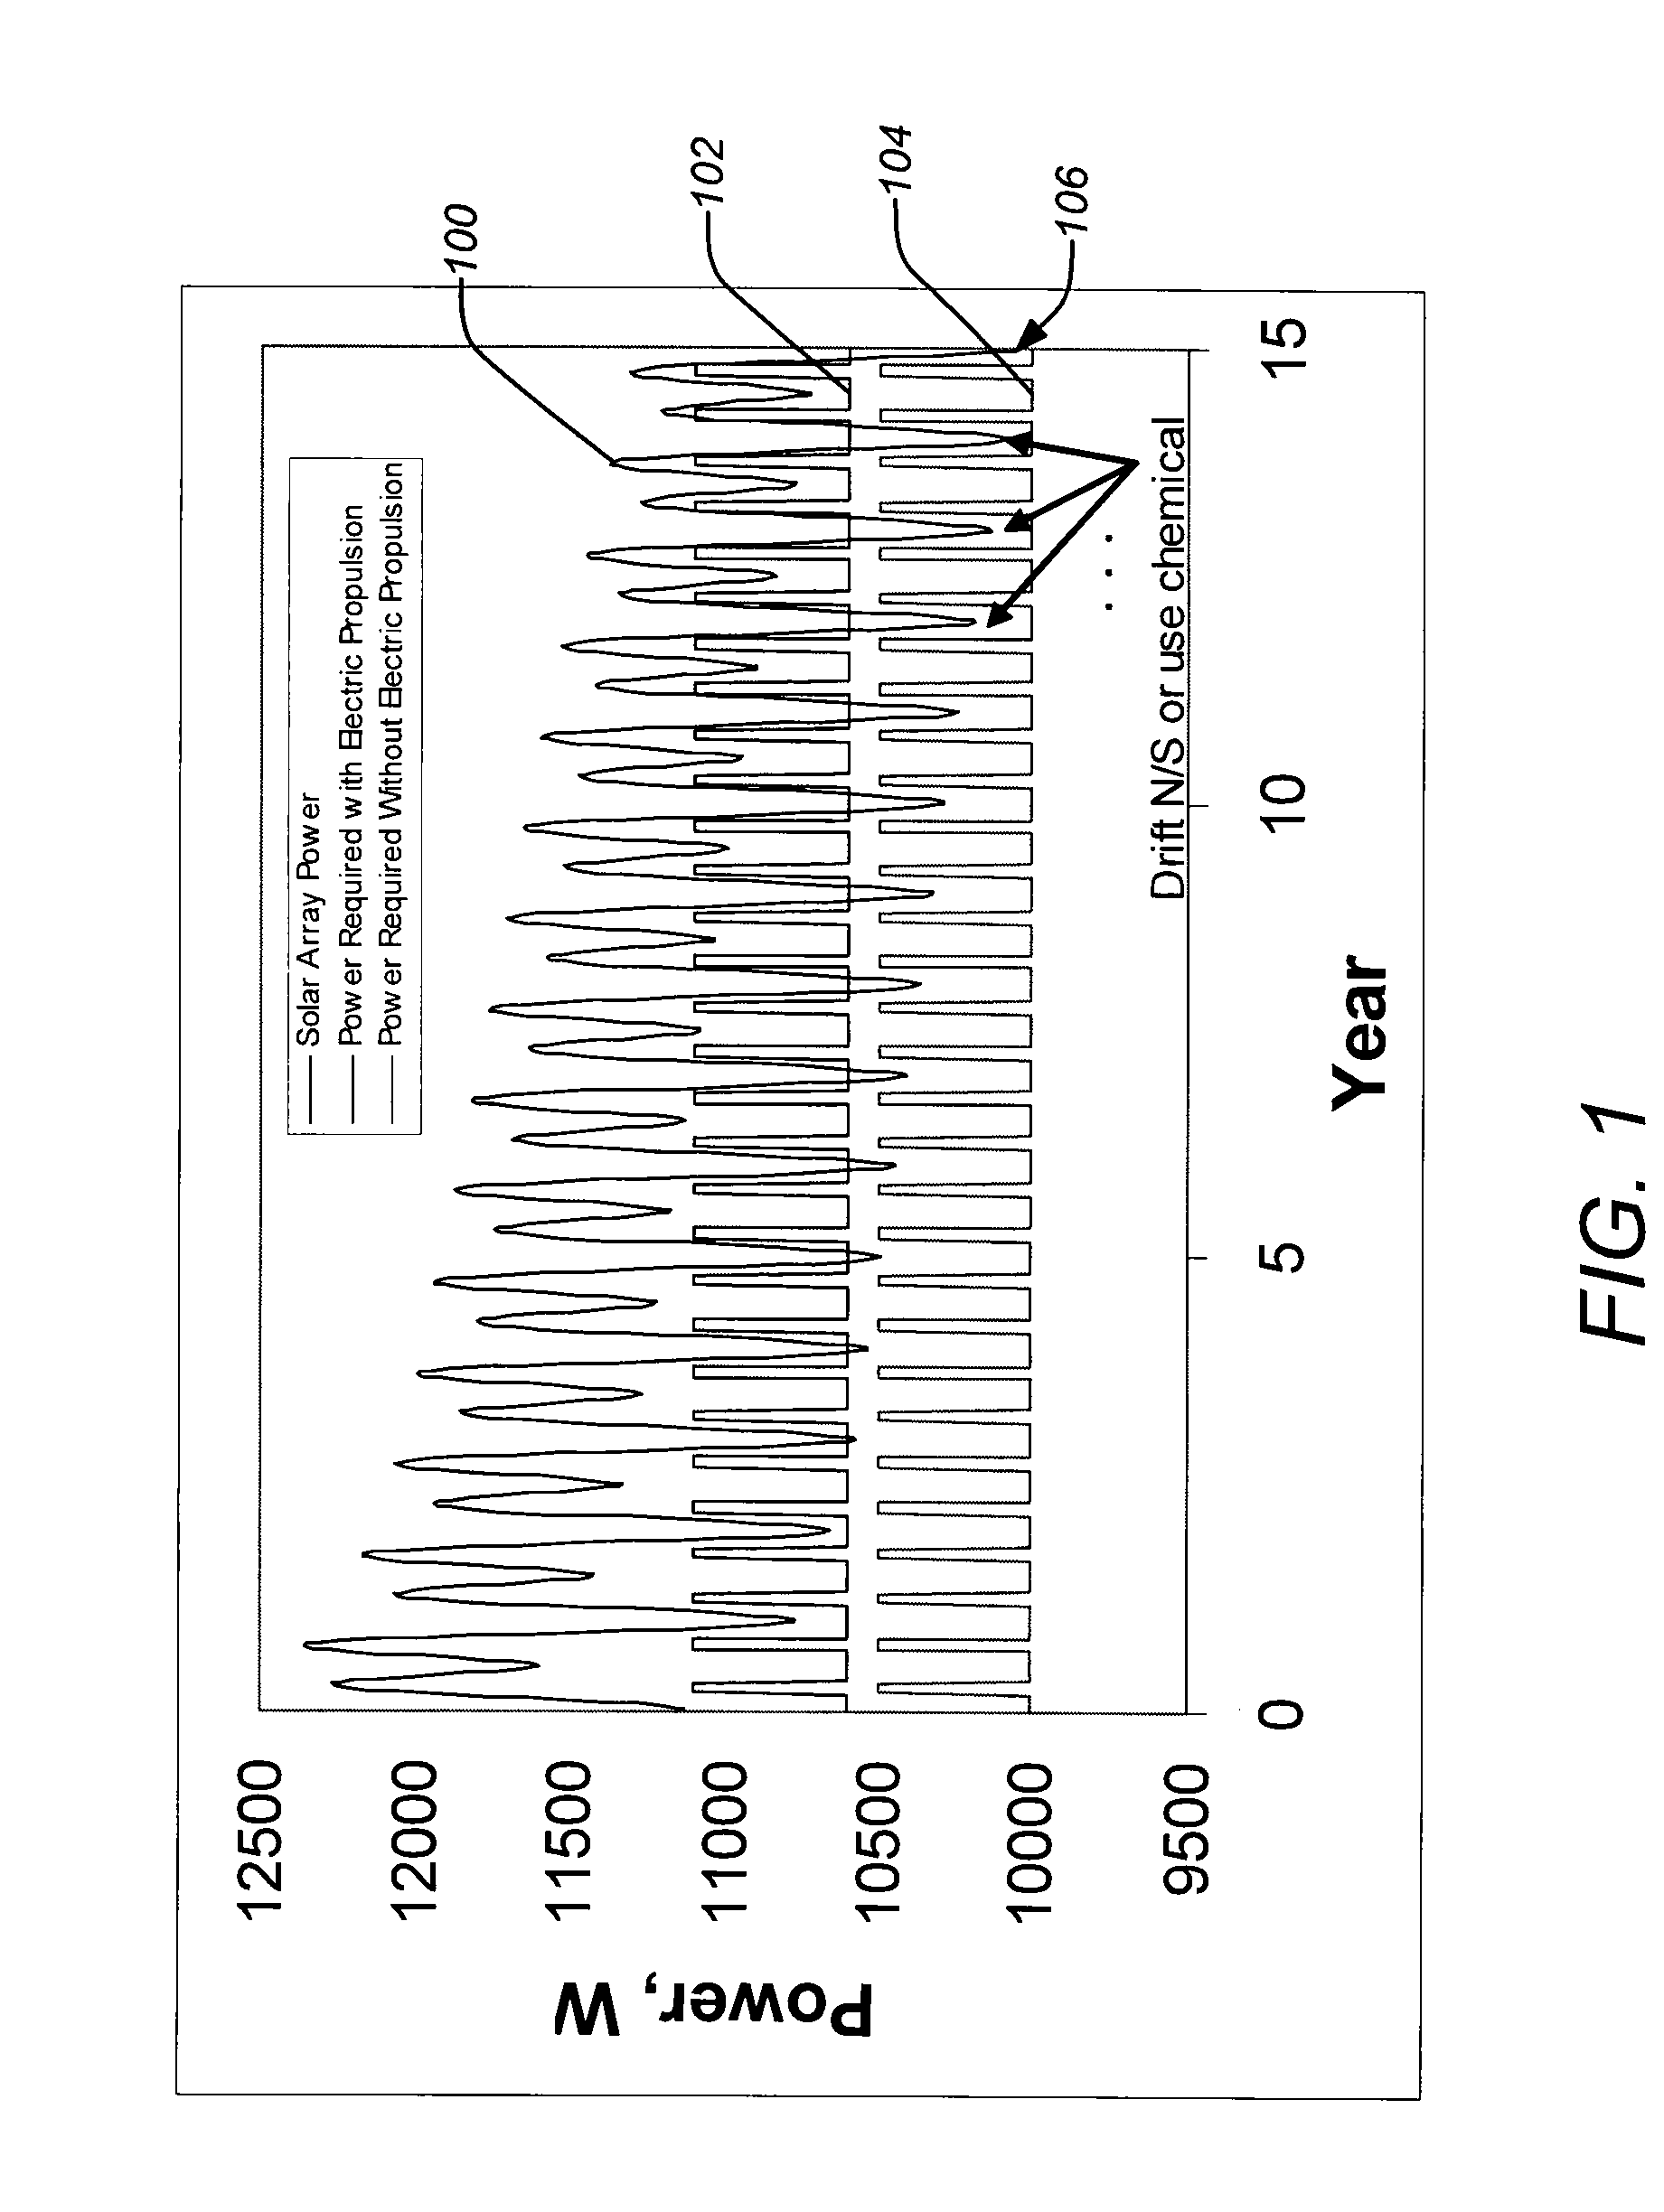 Power optimized system for electric propulsion stationkeeping geosynchronous spacecraft